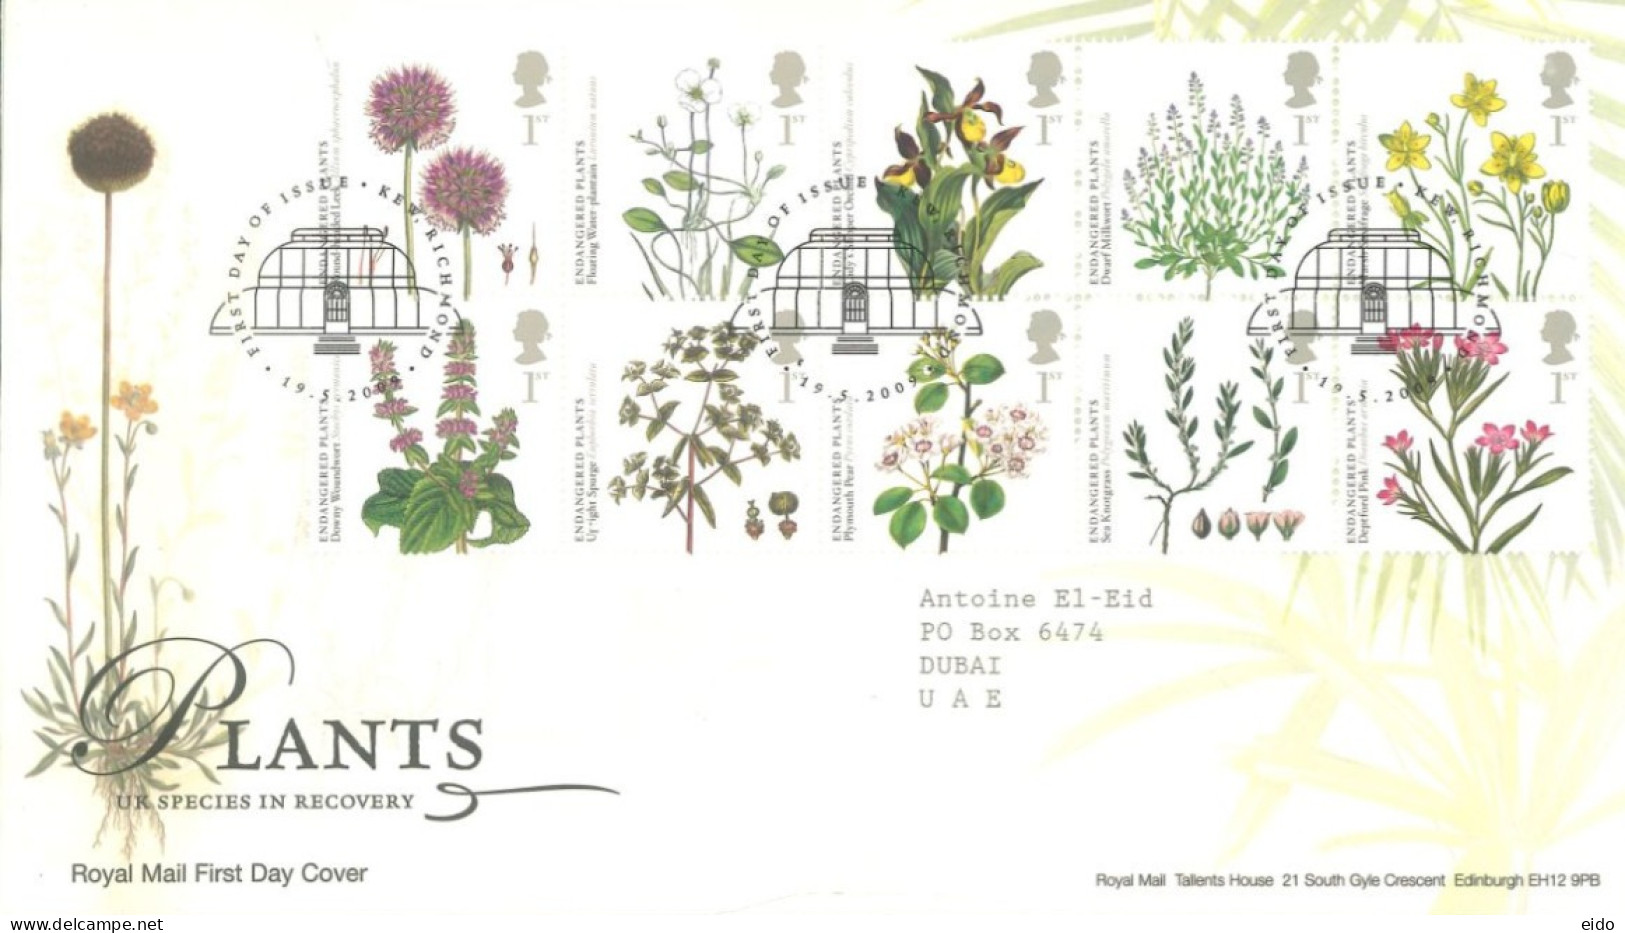 GREAT BRITAIN - 2009, FDC STAMPS OF PLANTS, UK SPECIES IN RECOVERY. - Covers & Documents